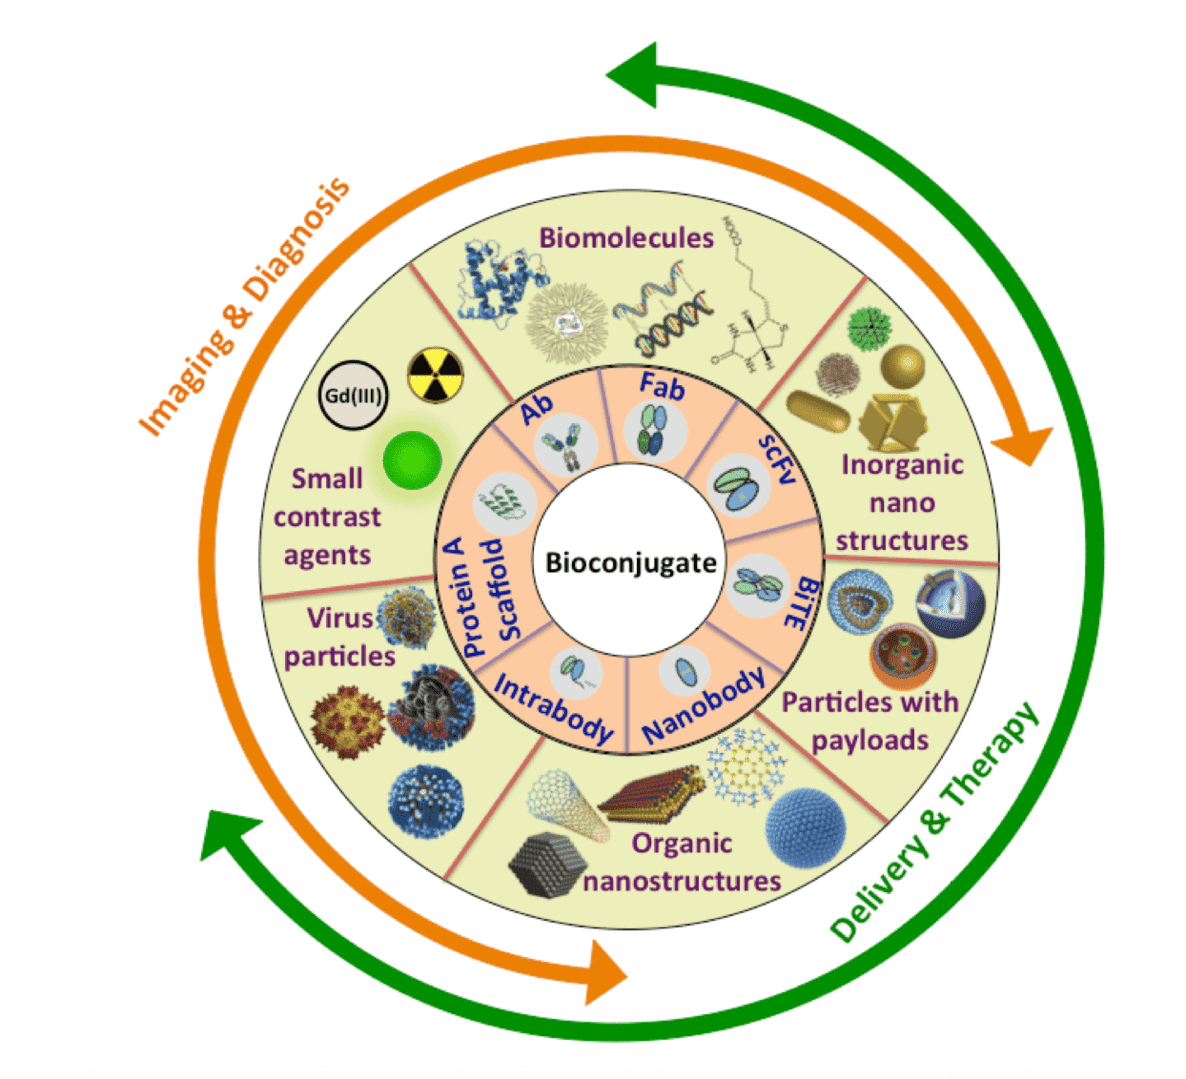 A brief summary of materials that can be bio-conjugated into antibody-based probes for numerous theranostic applications, including high-resolution imagery, payloads delivery, as well as the diagnosis and therapy of diverse disease. The inner circle includes the major antibody based products as targeting moieties in the probe; the outer circle includes a broad range of inorganic and organic complexes as functional moieties in the probe.  Abbreviations: Ab, antibody; BiTE, bispecific T-cell engager; scFv, single-chain variable fragment.